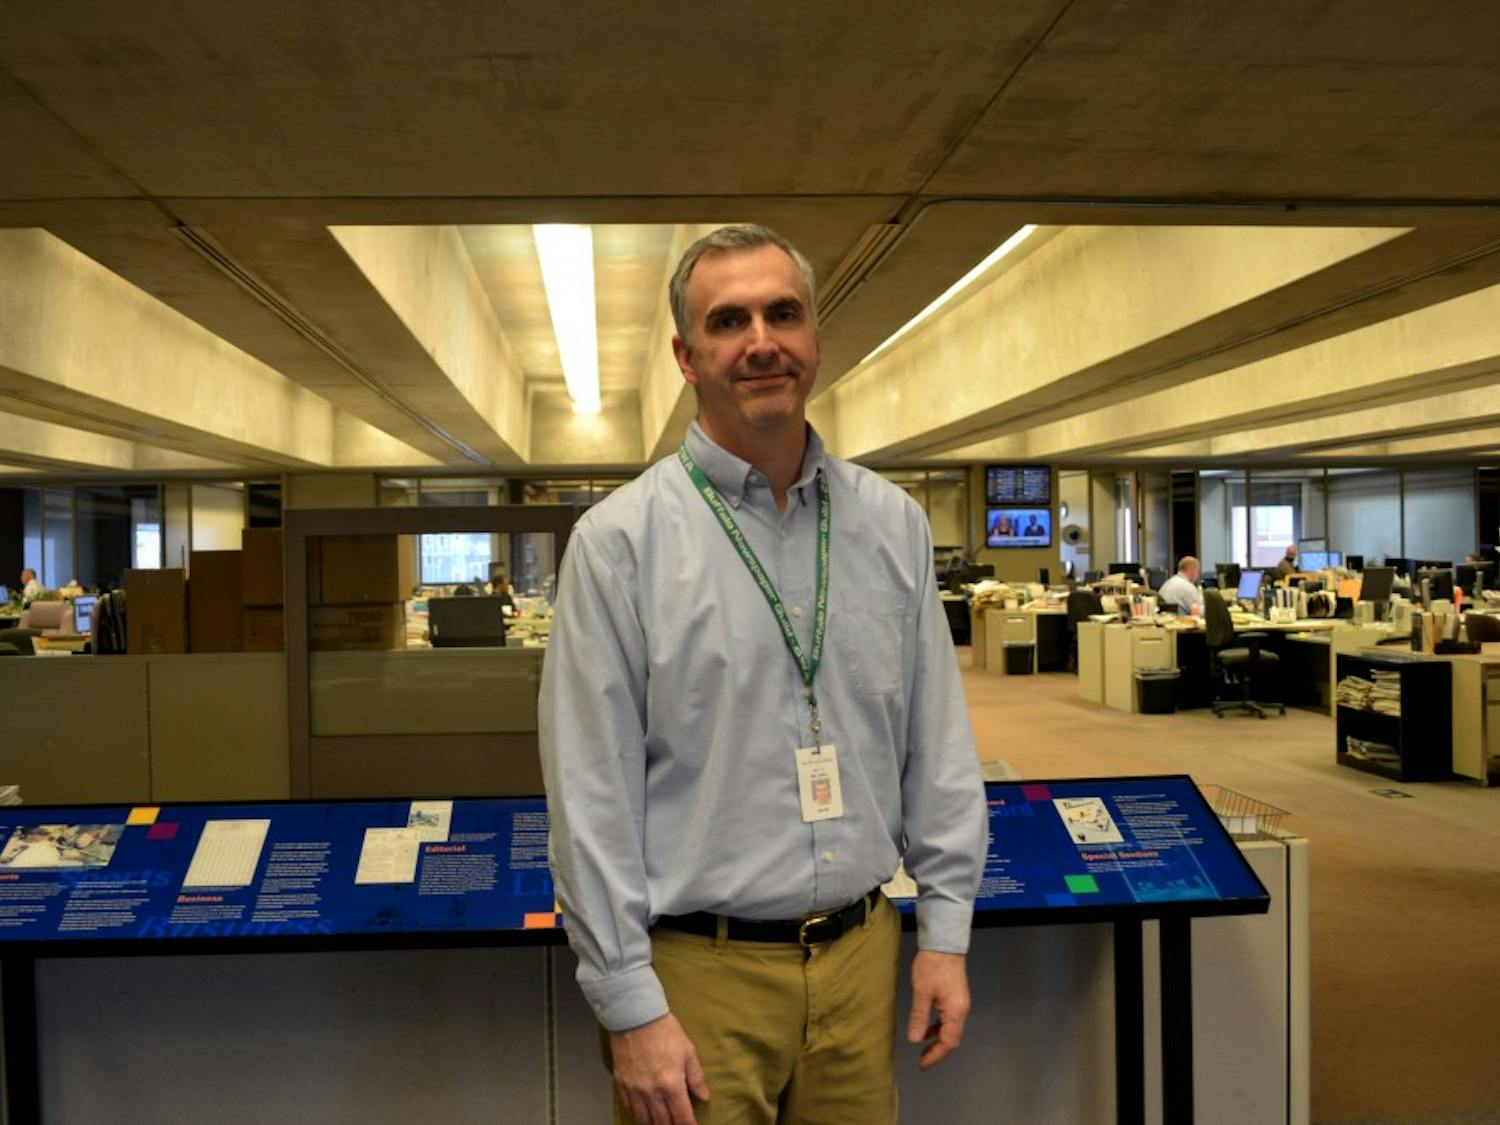 Keith McShea was once in the classroom at UB taking journalism courses. Now, he is the deputy sports editor for The Buffalo News, and an adjunct professor at UB teaching the students what he once learned as a young journalist.